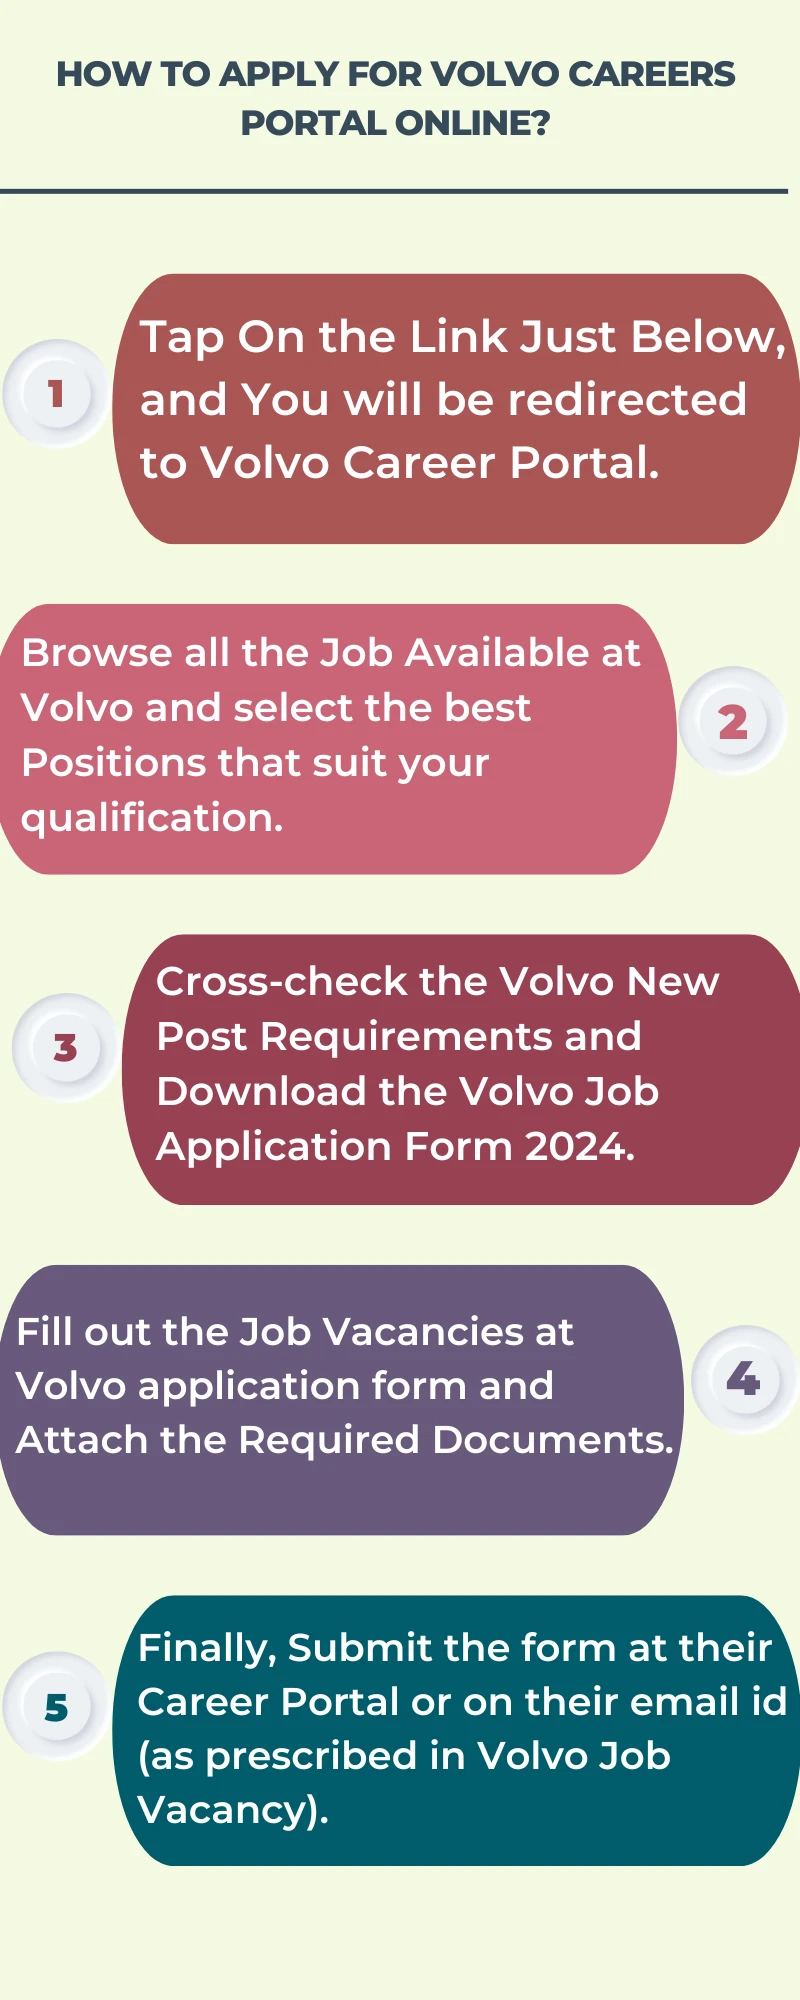 How To Apply for Volvo Careers Portal Online?